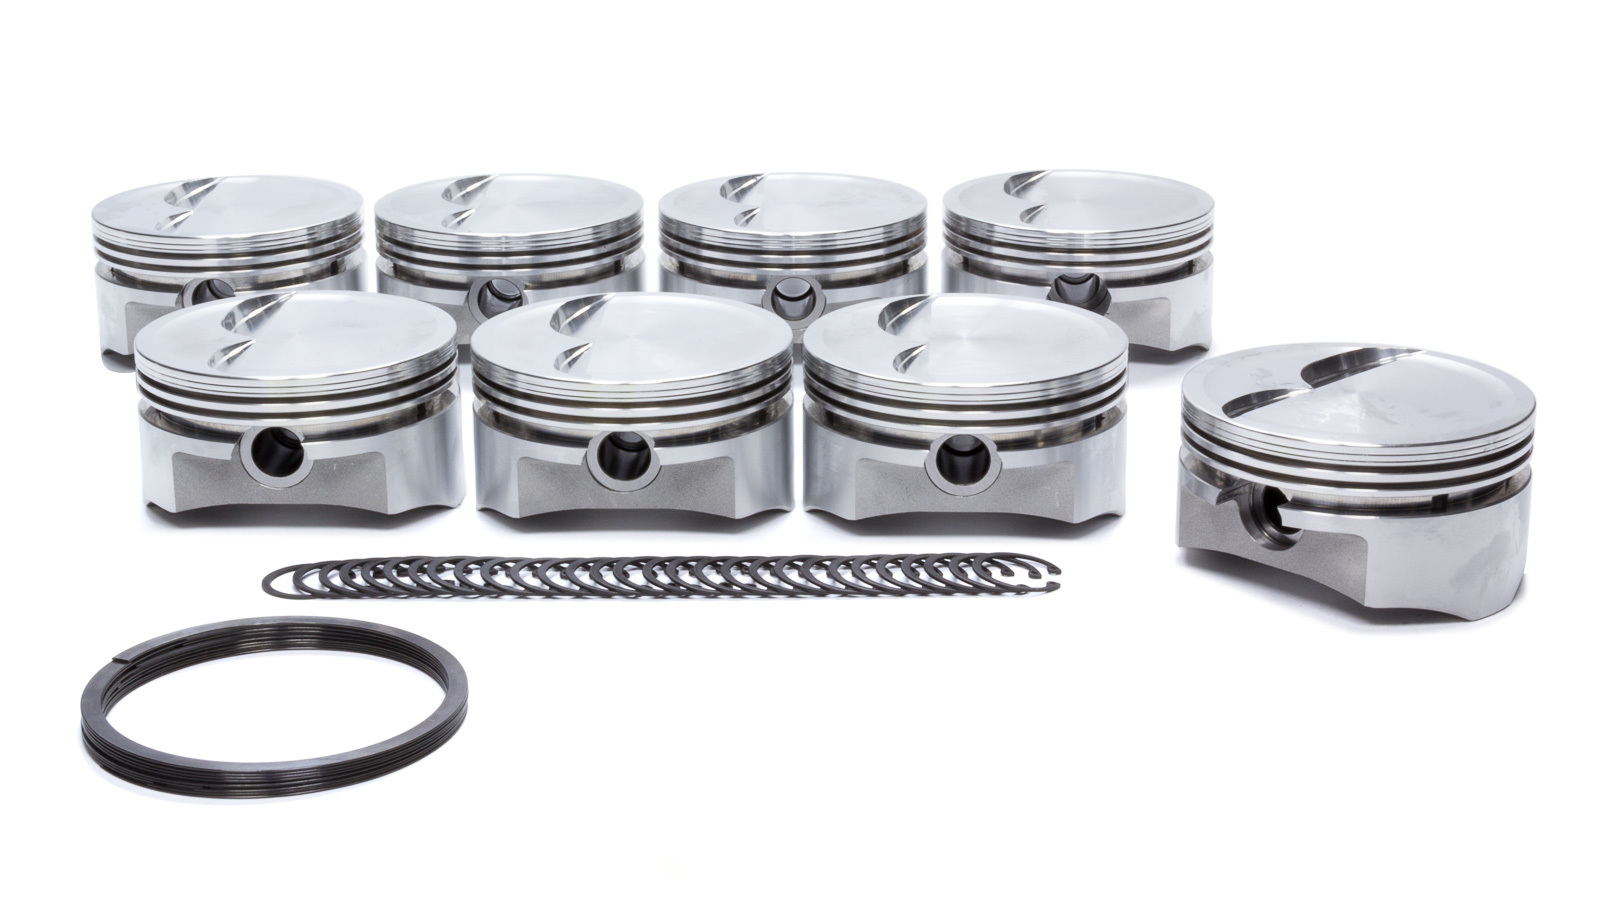 DSS Racing 8741-4030 Piston, E Series, Forged, 4.030 in Bore, 5/64 x 5/64 x 3/16 in Ring Grooves, Minus 6.00 cc, Small Block Ford, Set of 8